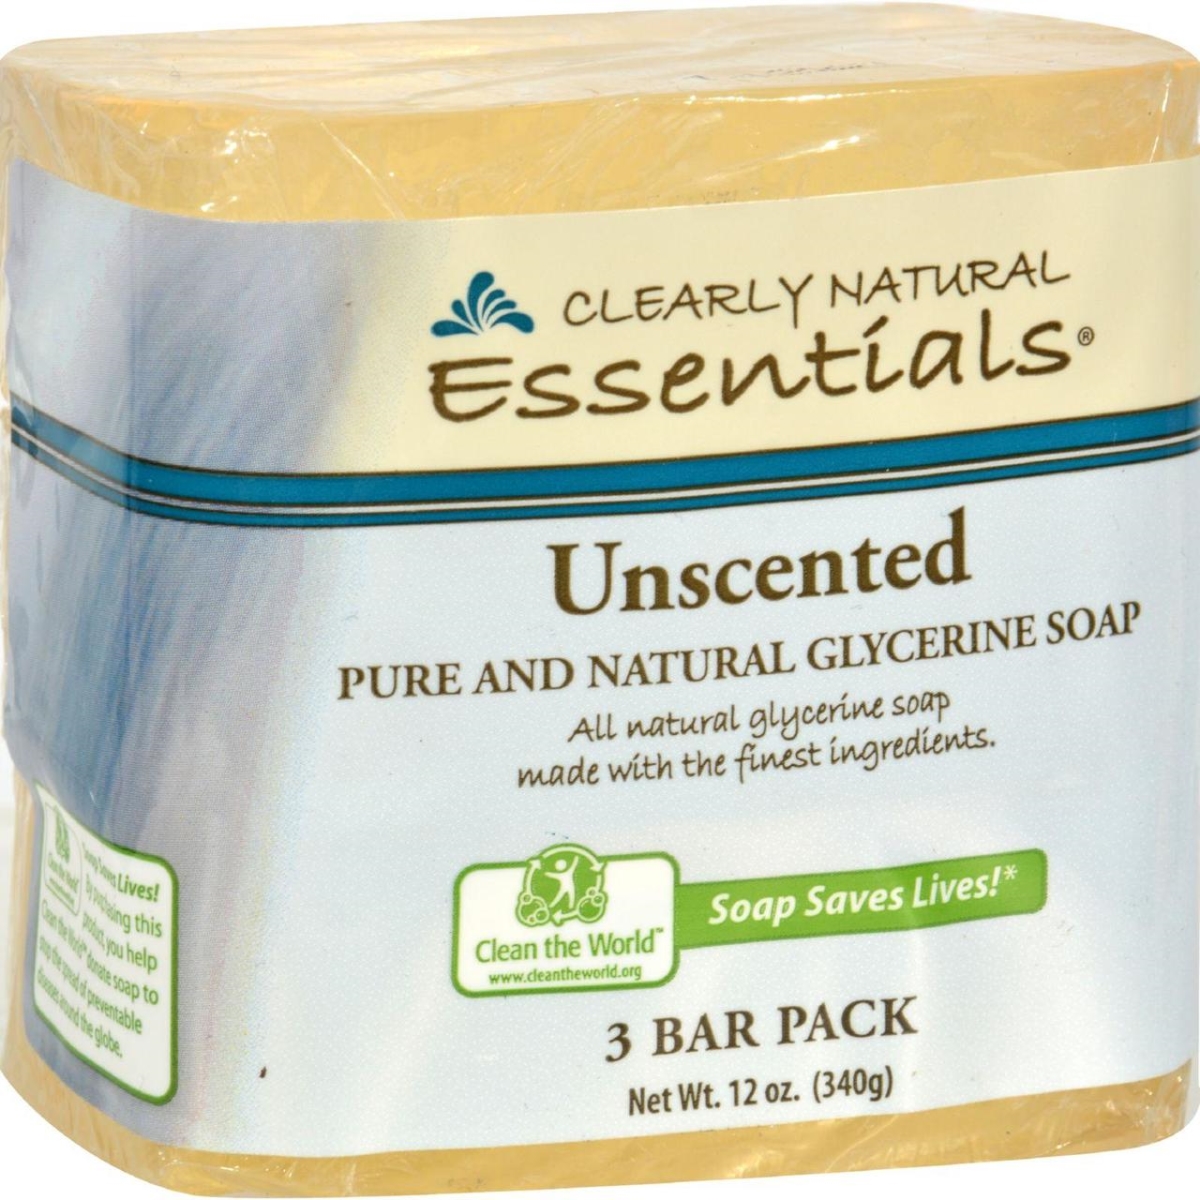 Clearly Natural Hg1170448 4 Oz Unscented Bar Soap, Pack Of 3